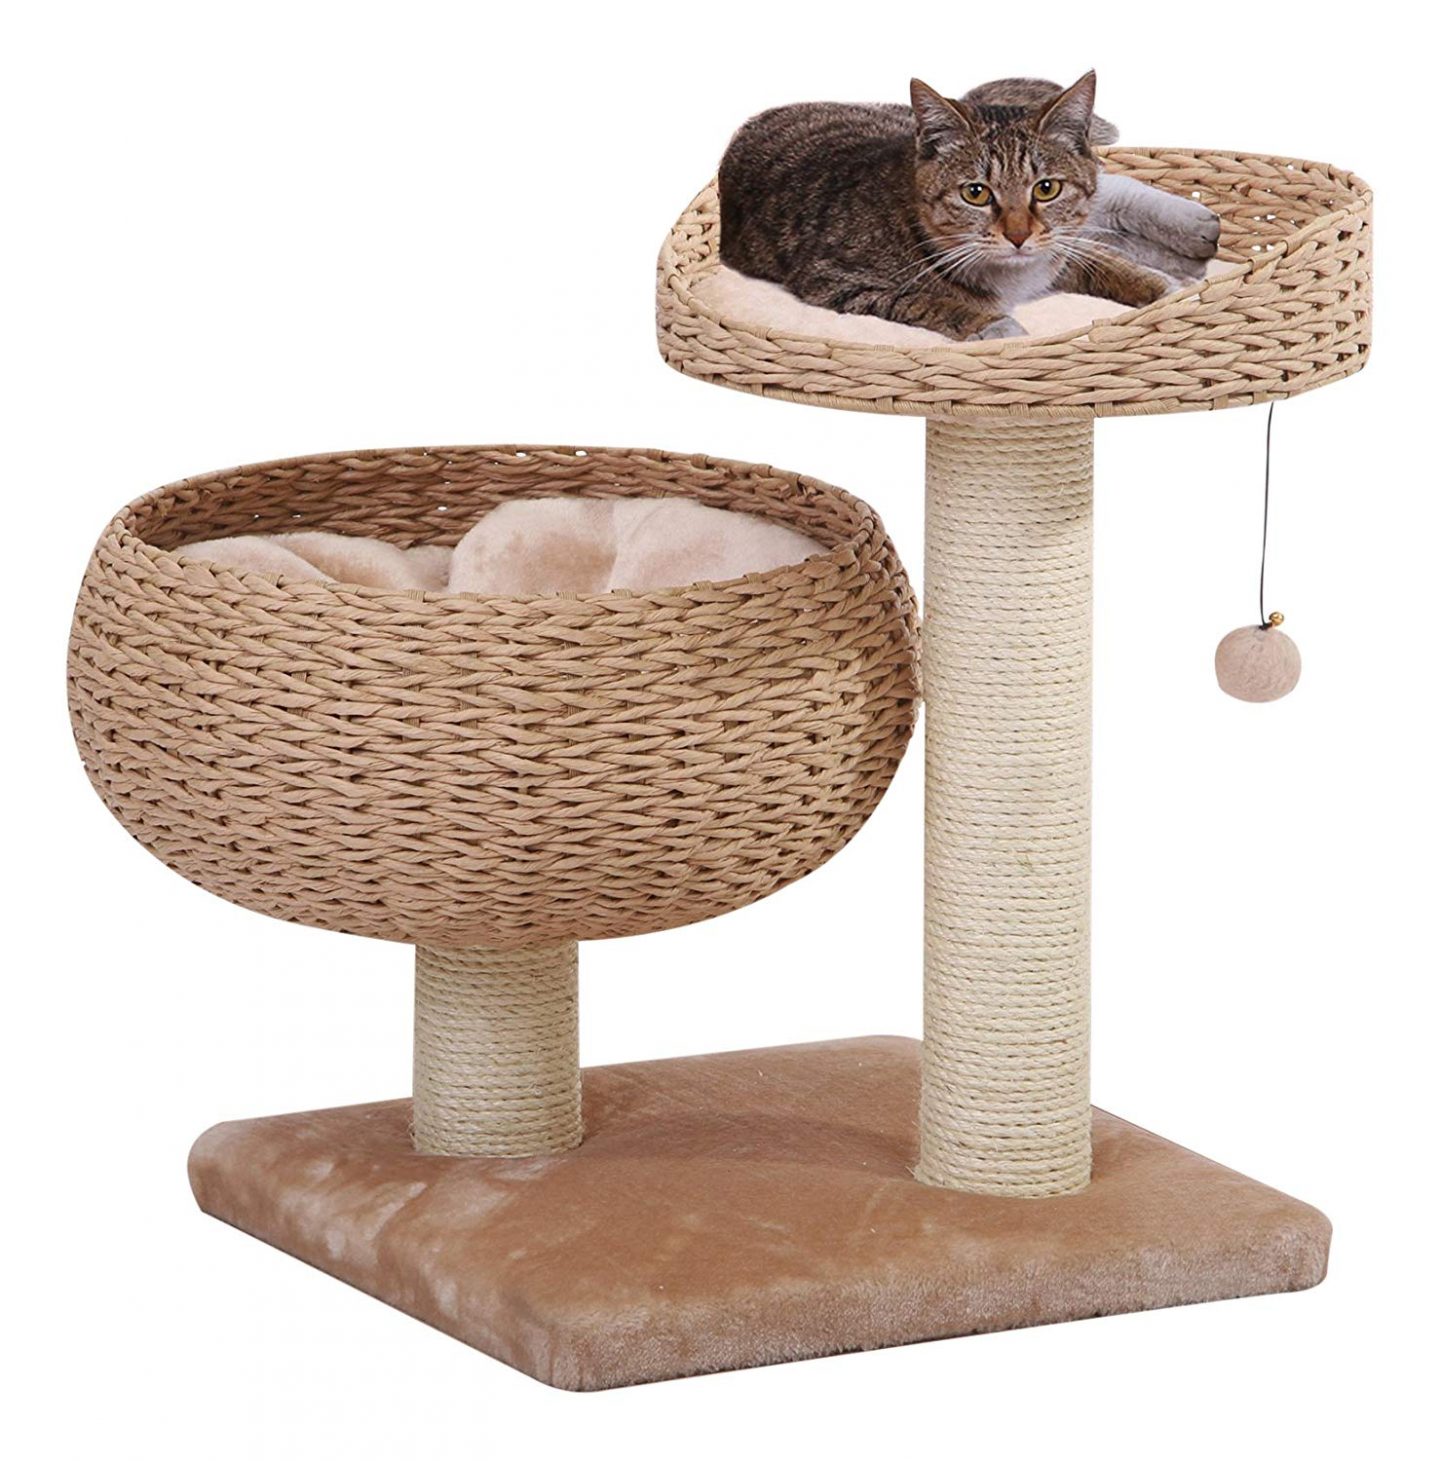 A modern wicker style cat tree from PetPals that is budget friendly and great for large and senior cats.